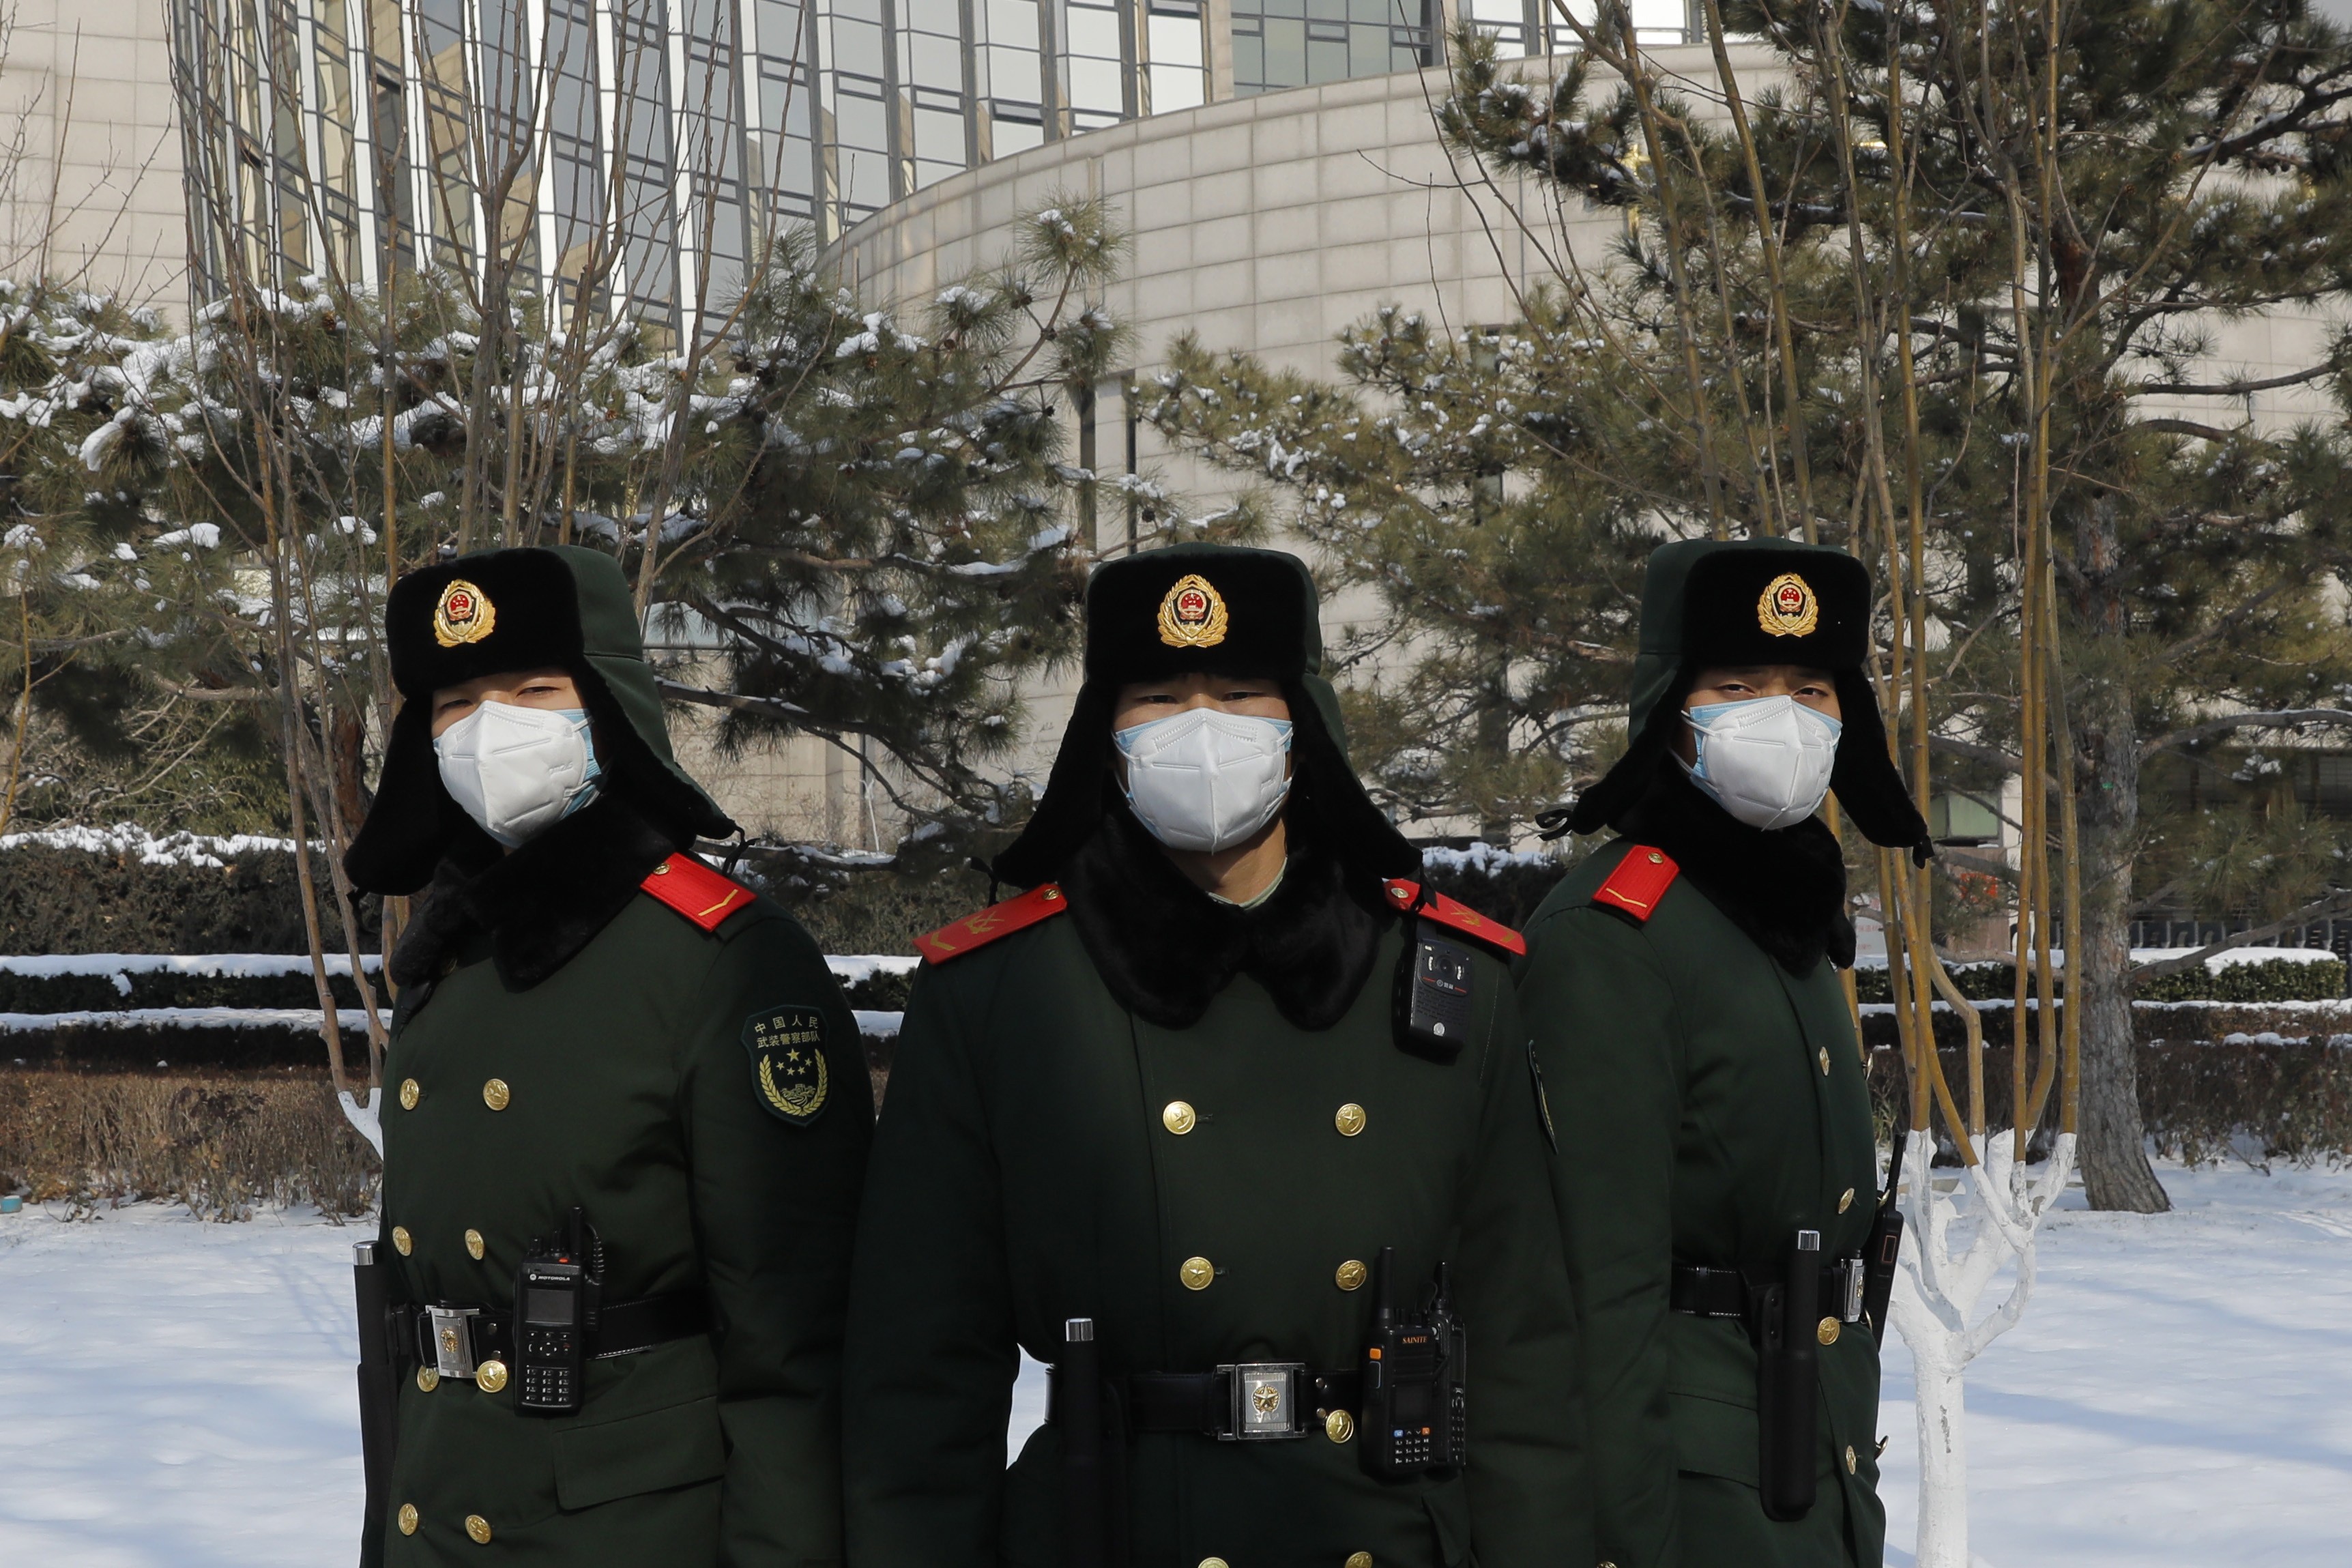 Chinese paramilitary police officers wearing face masks stand outside the headquarters of the People's Bank of China in Beijing on February 7. While some analysts have said China’s economy could be adversely affected by the coronavirus, the Chinese central bank has already injected a large amount of liquidity into the system. Photo: EPA-EFE